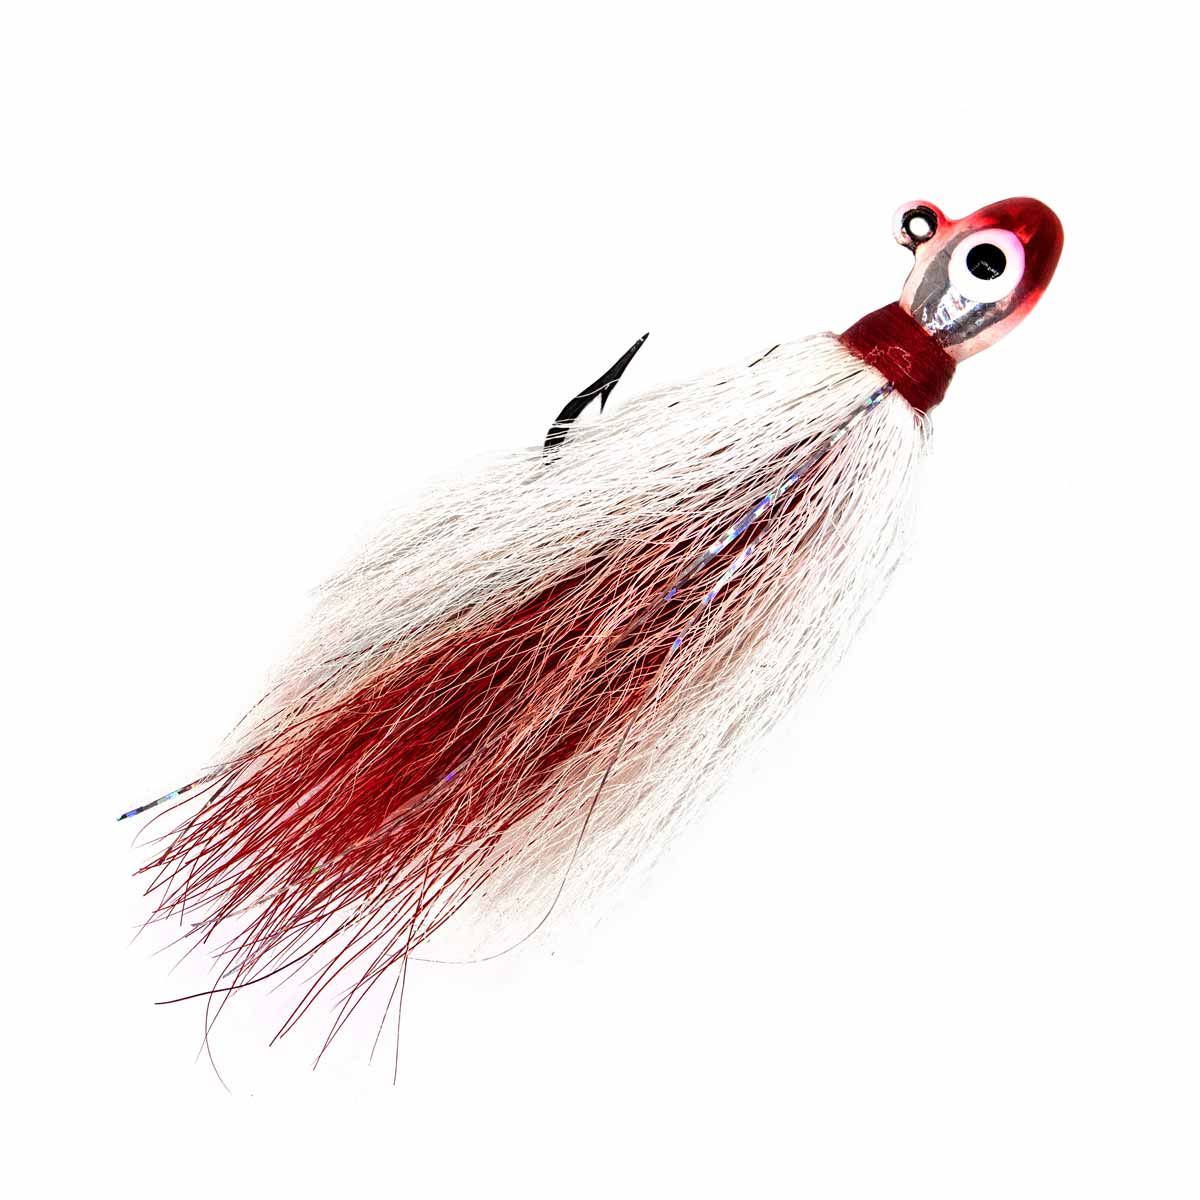 Charlies Worms Pompano Bucktail Jig Red shad